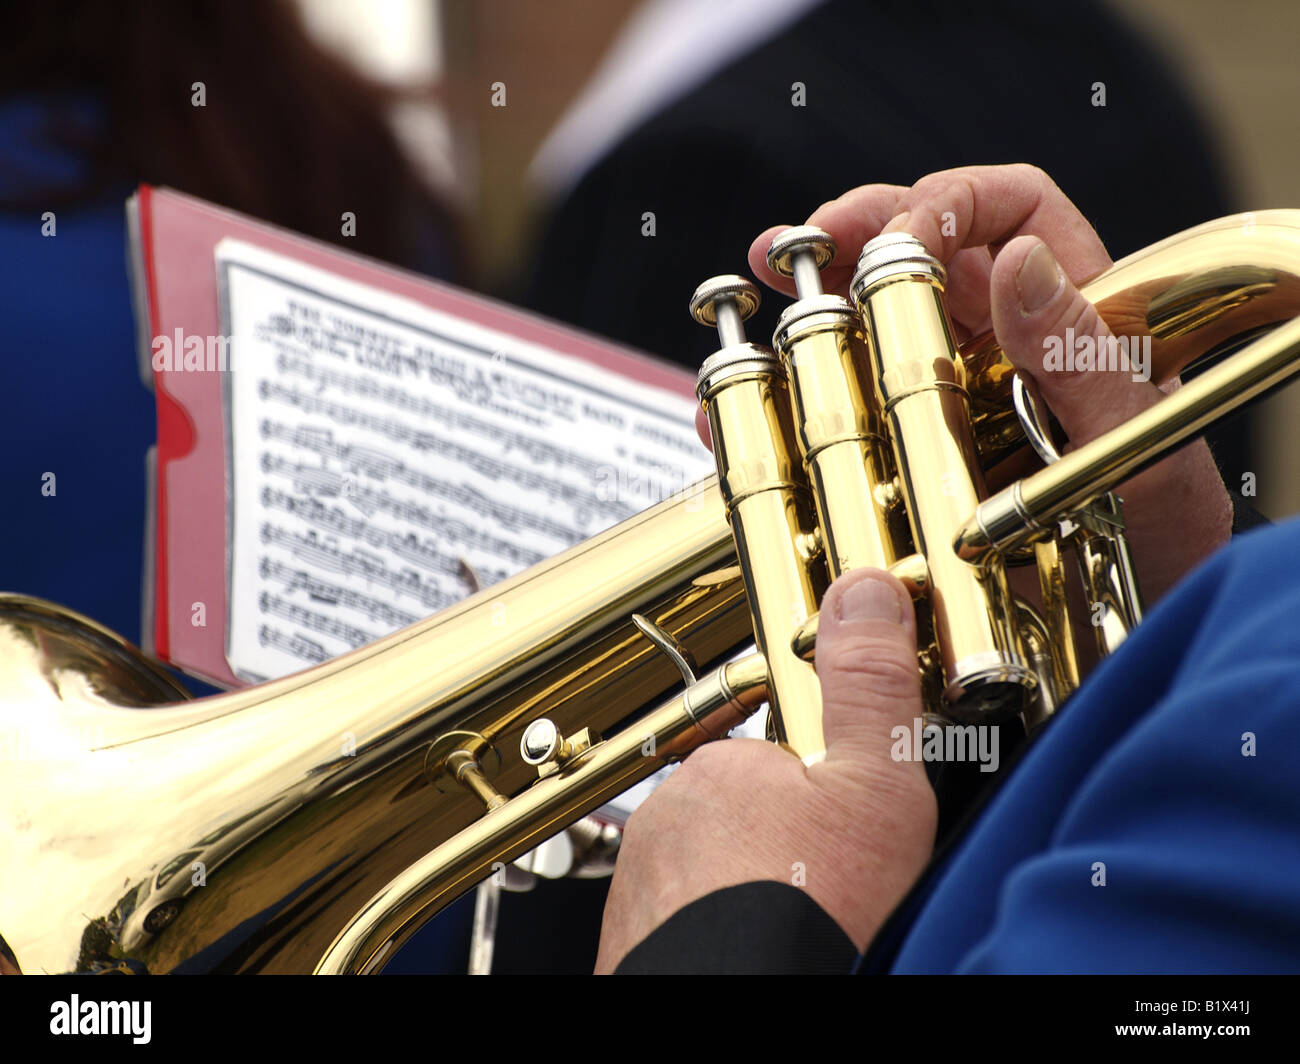 Trumpet being played by a bandsman Stock Photo - Alamy